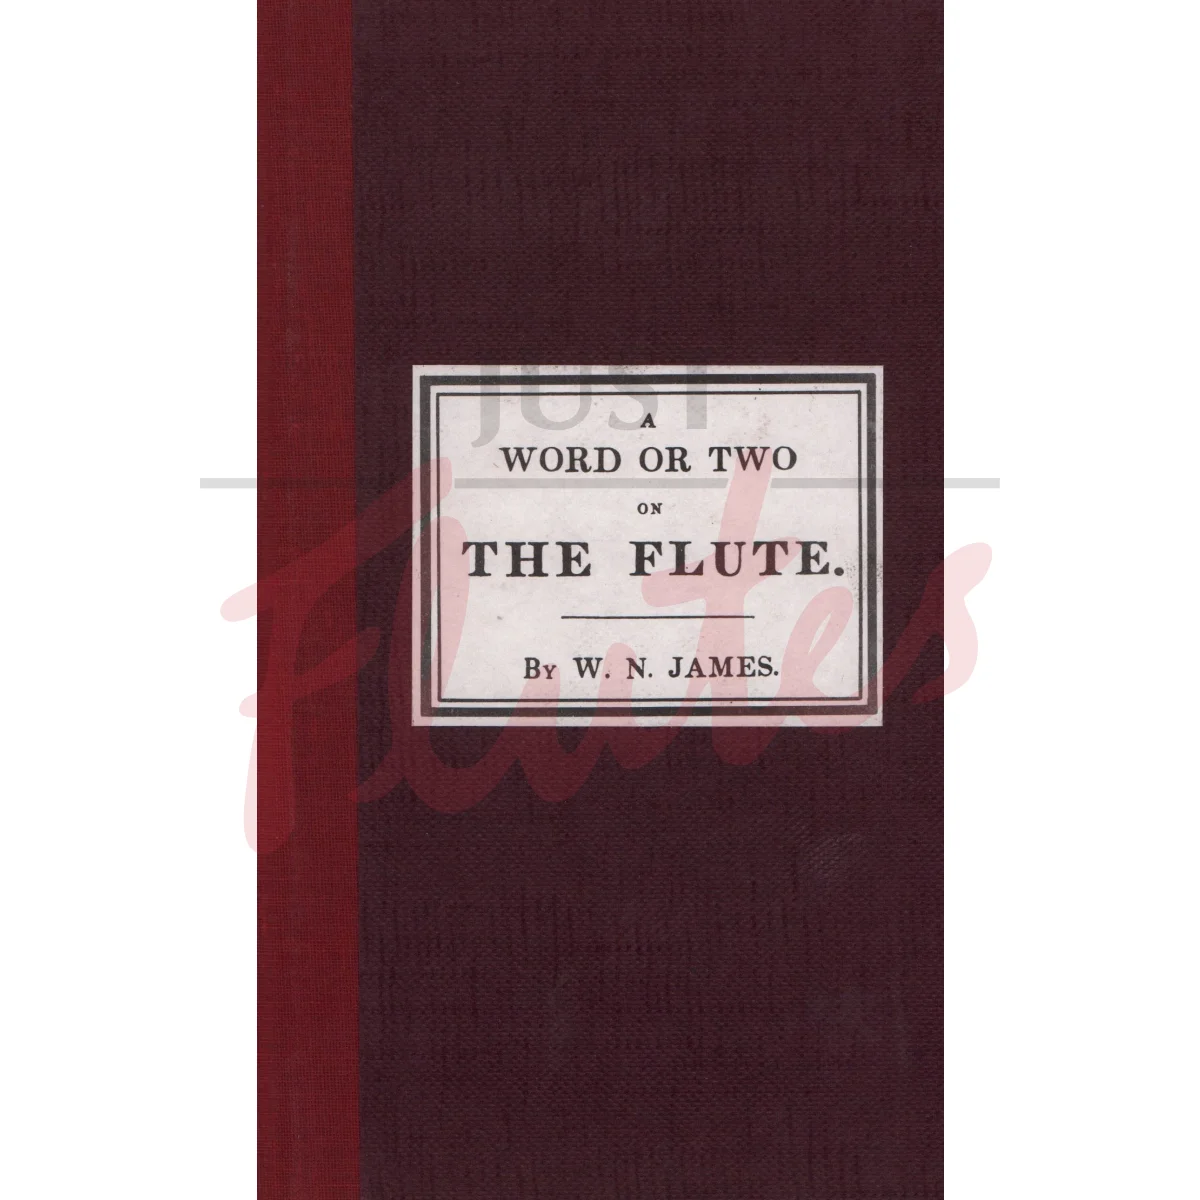 A Word or Two on The Flute